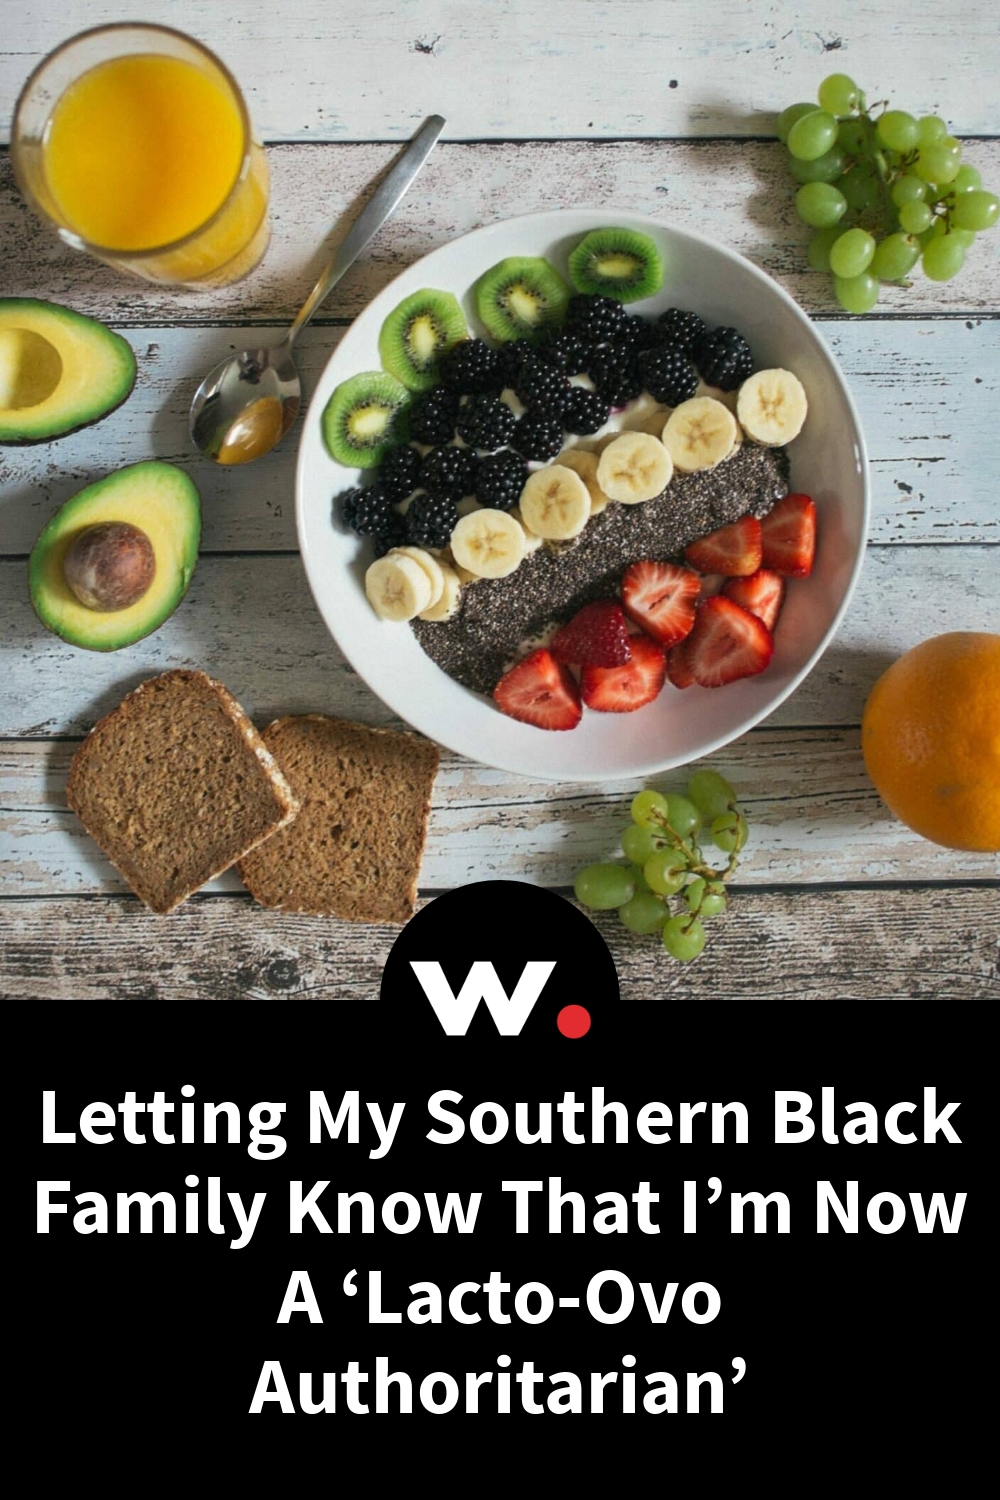 Letting My Southern Black Family Know That I’m Now A ‘Lacto-Ovo Authoritarian’